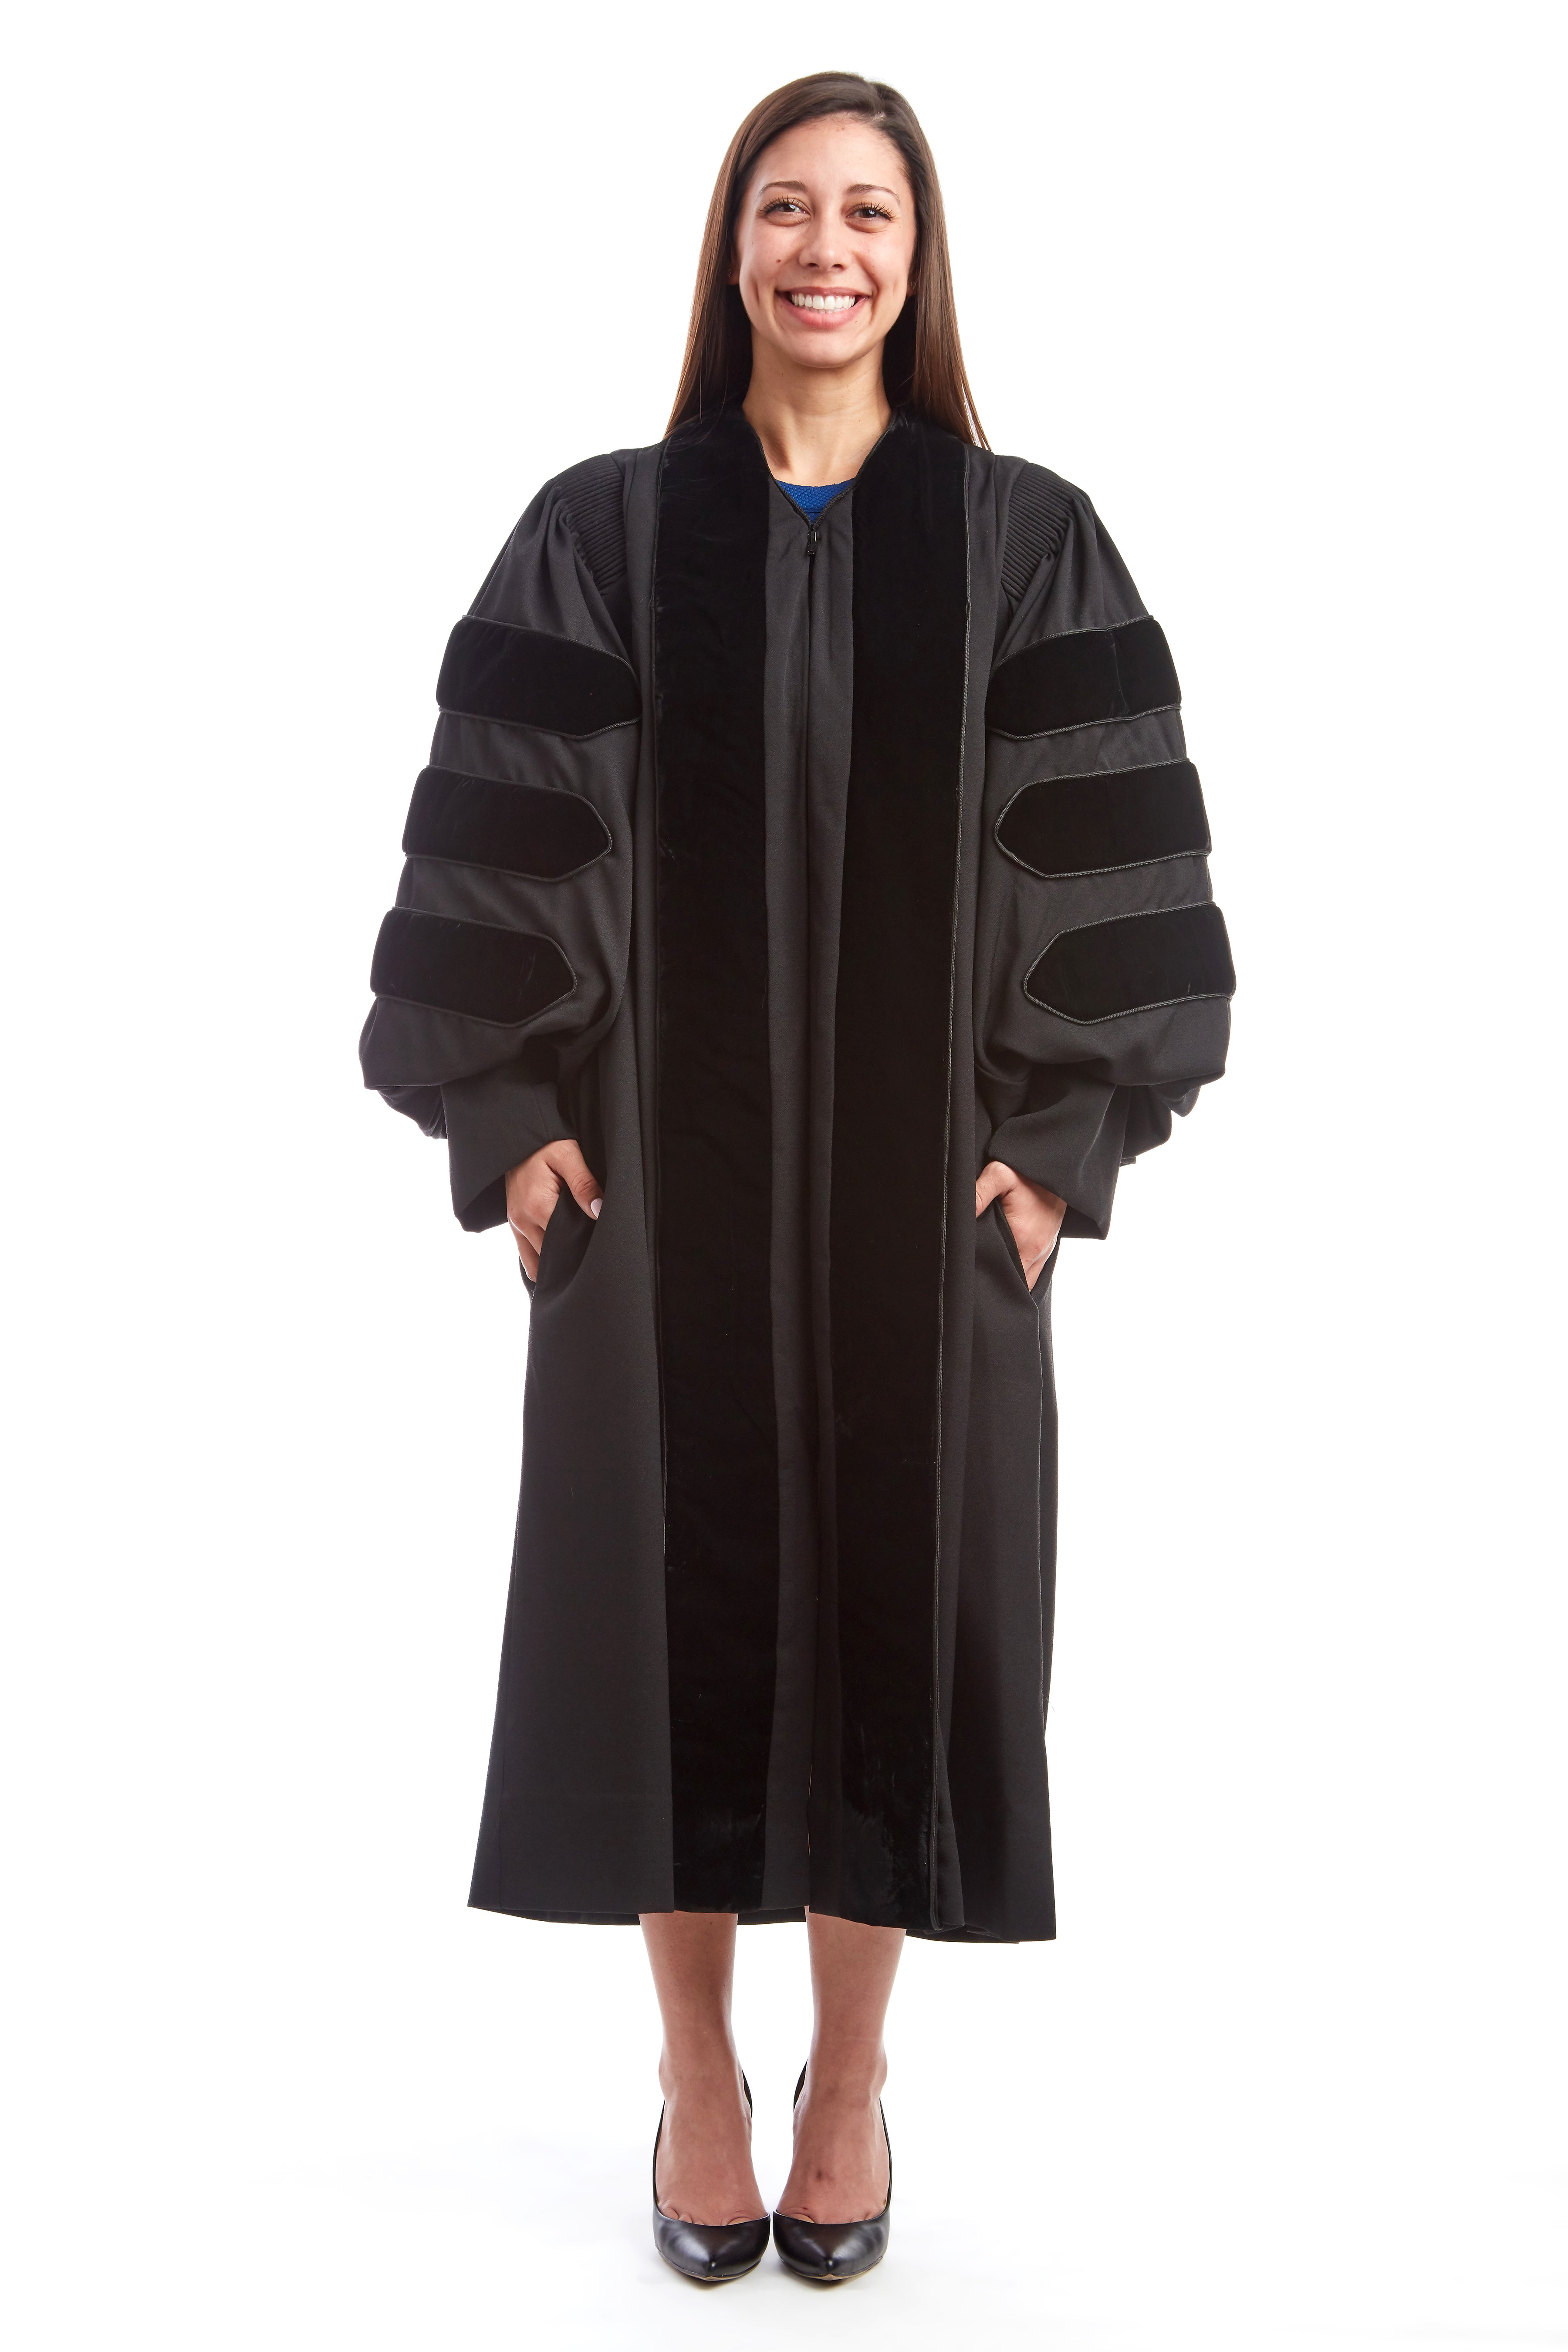 Premium Black Doctoral Gown with Black Piping for Graduation 